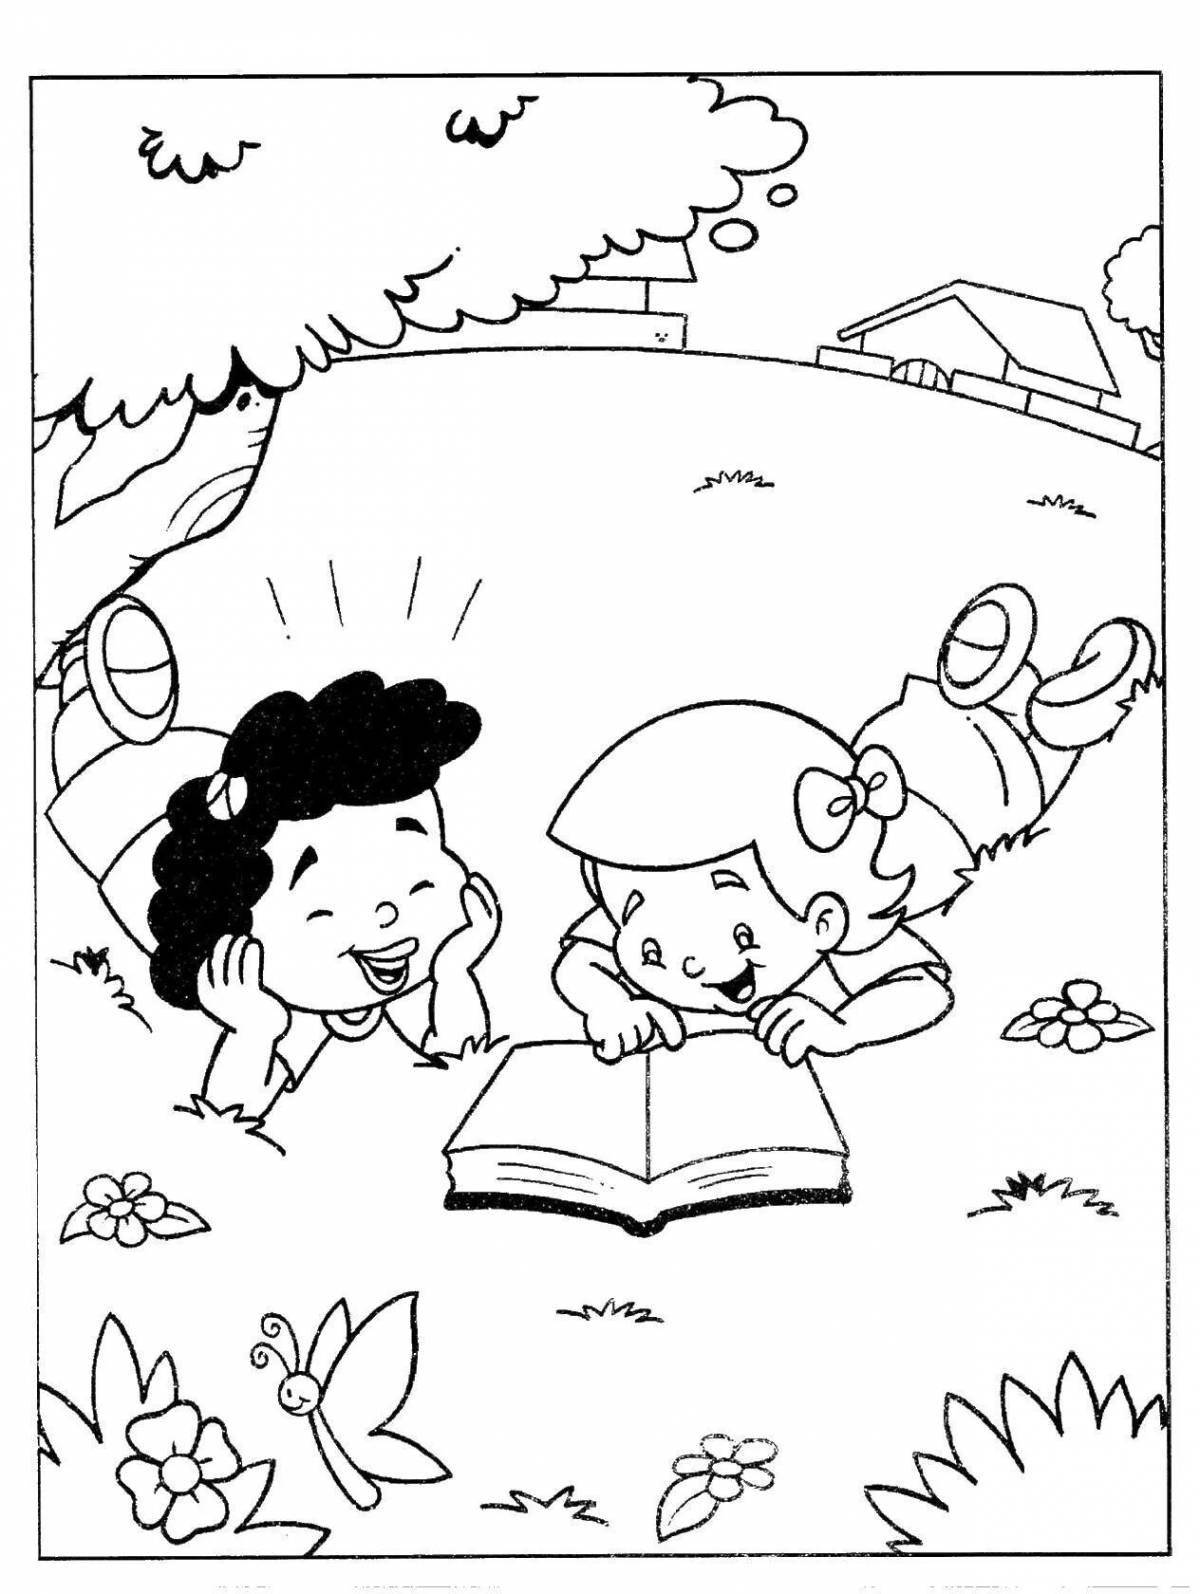 Fun coloring book for reading